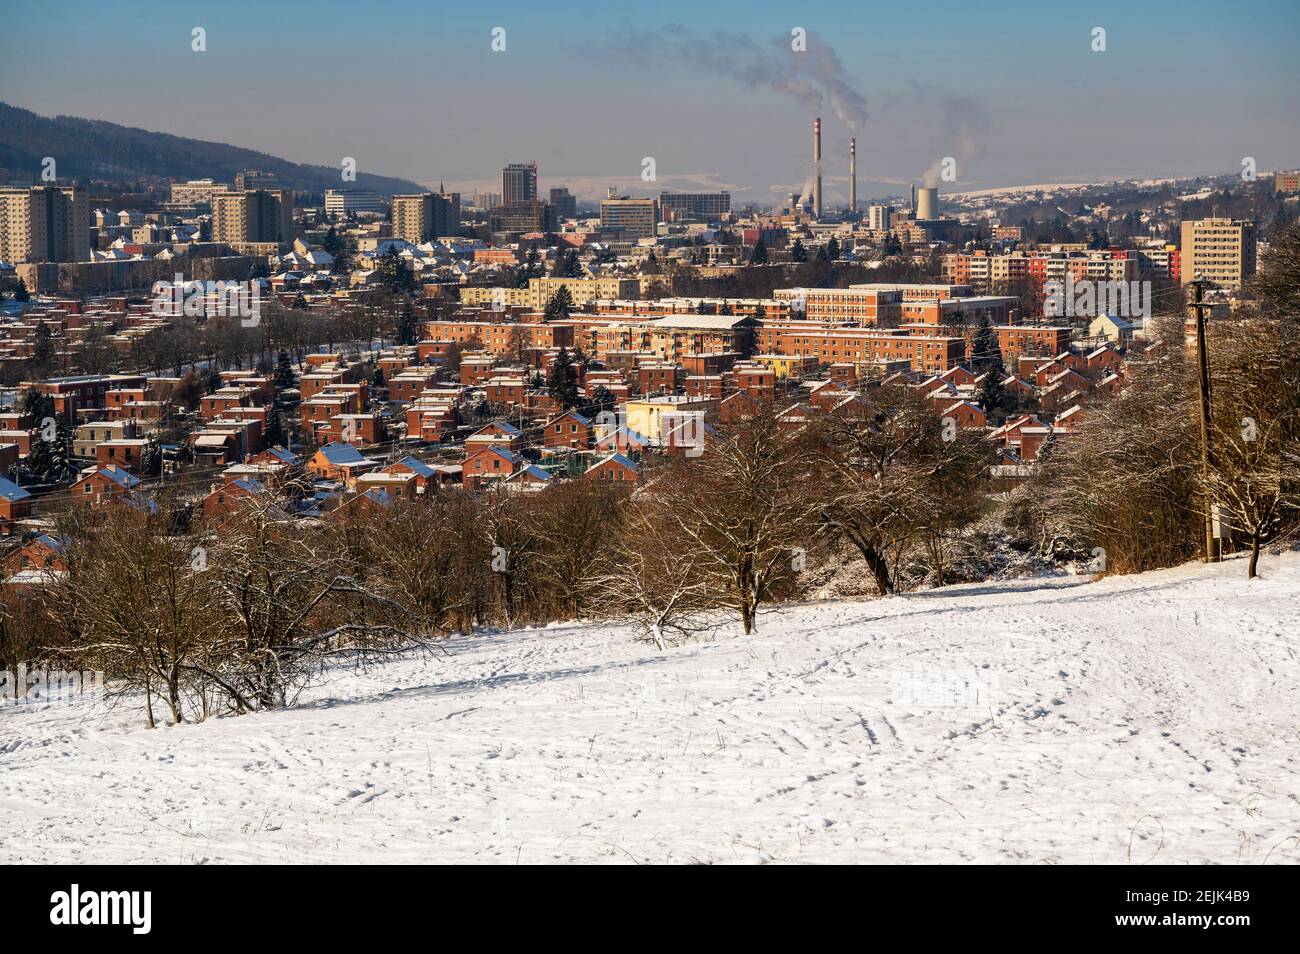 Snowy winter view of northeastern part of city Zlin with typical red brick houses in residential area and heating plant chimney on background, Czechia Stock Photo